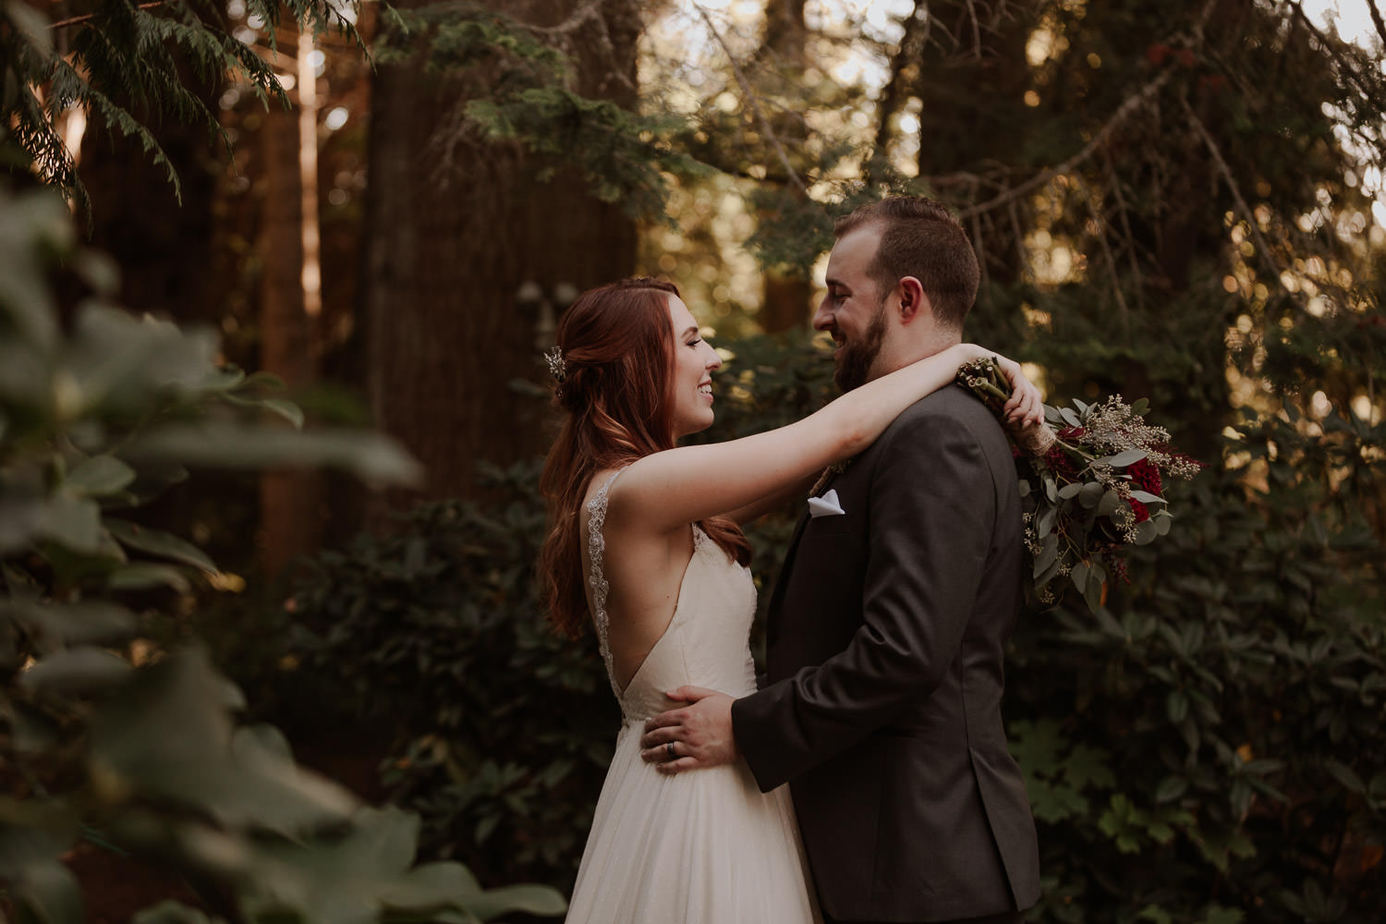 Bride and groom dance in the forest. Redwoods surround them in the background and bride smiles at groom. Knowing how much it costs to elope can help you plan our wedding day to its fullest